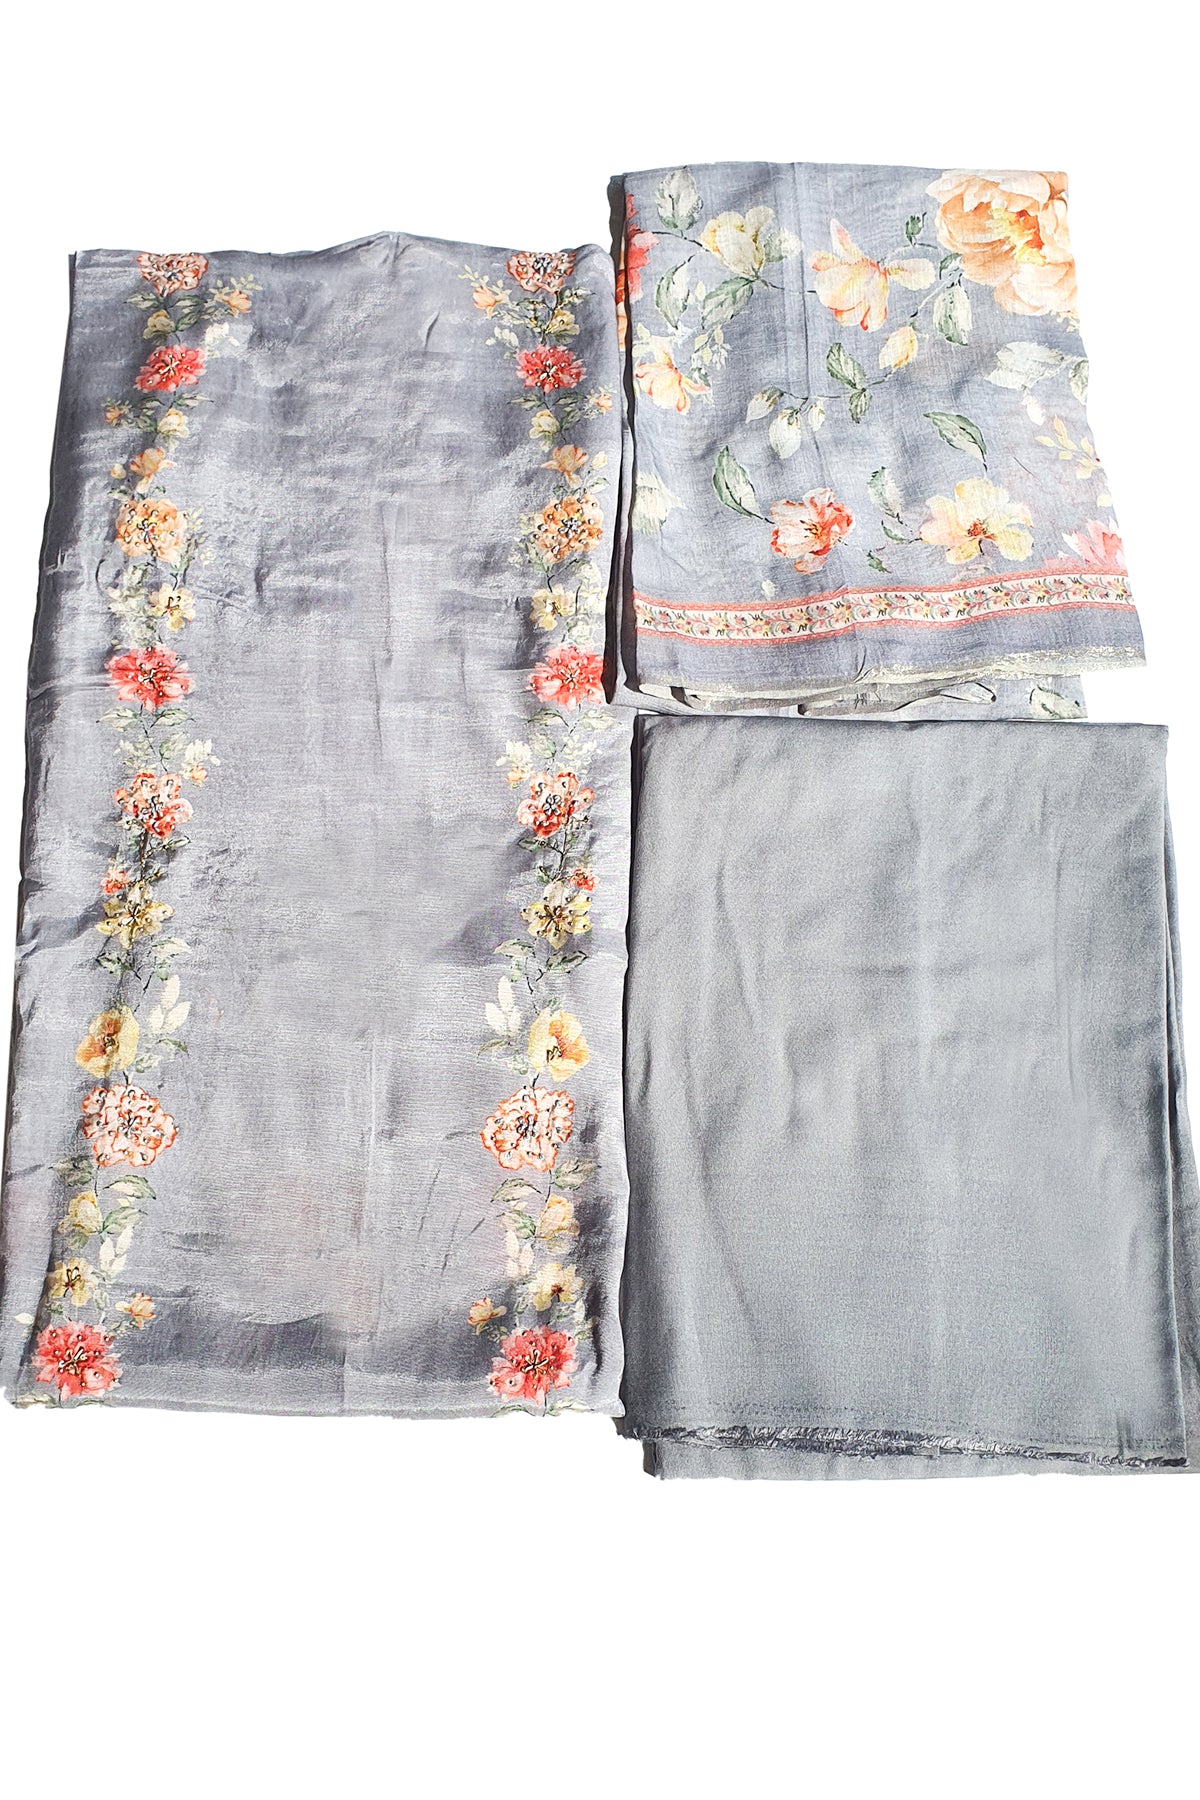 Grey Muslin Floral Printed Suit Set with Threadwork Embroidery